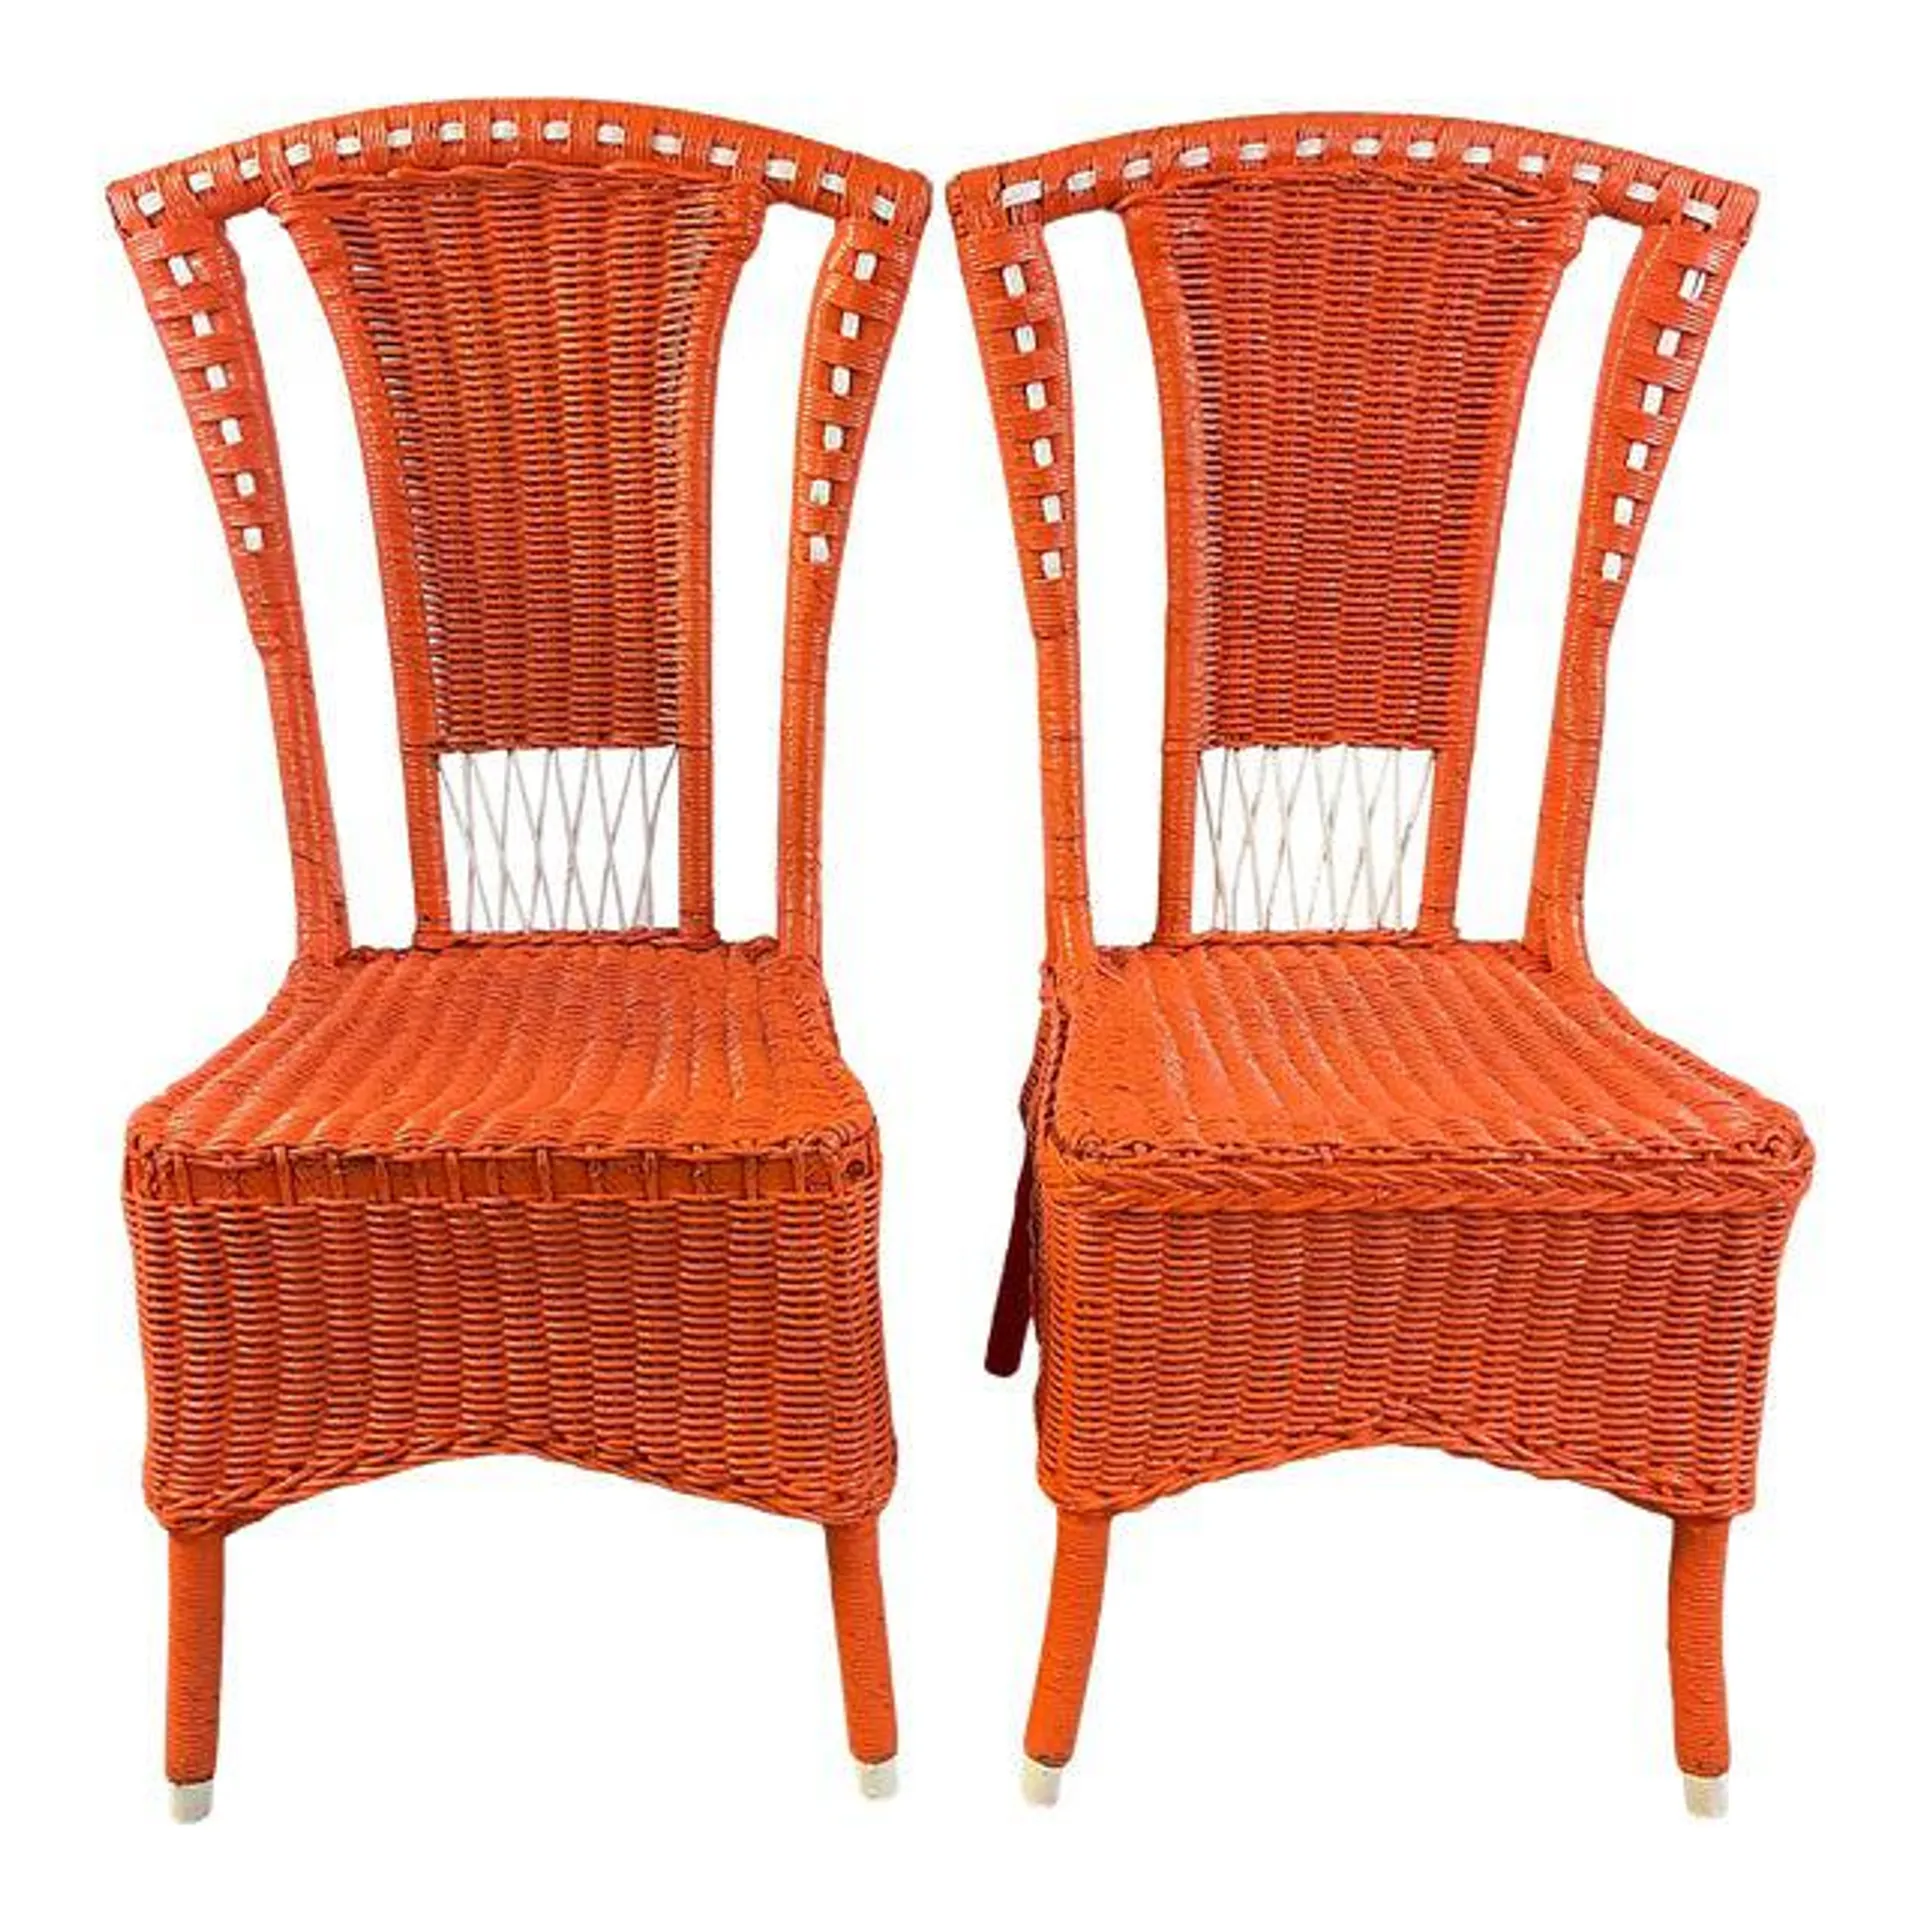 1920s Heywood-Wakefield Salmon-Coral Painted Wicker Chairs - a Pair.